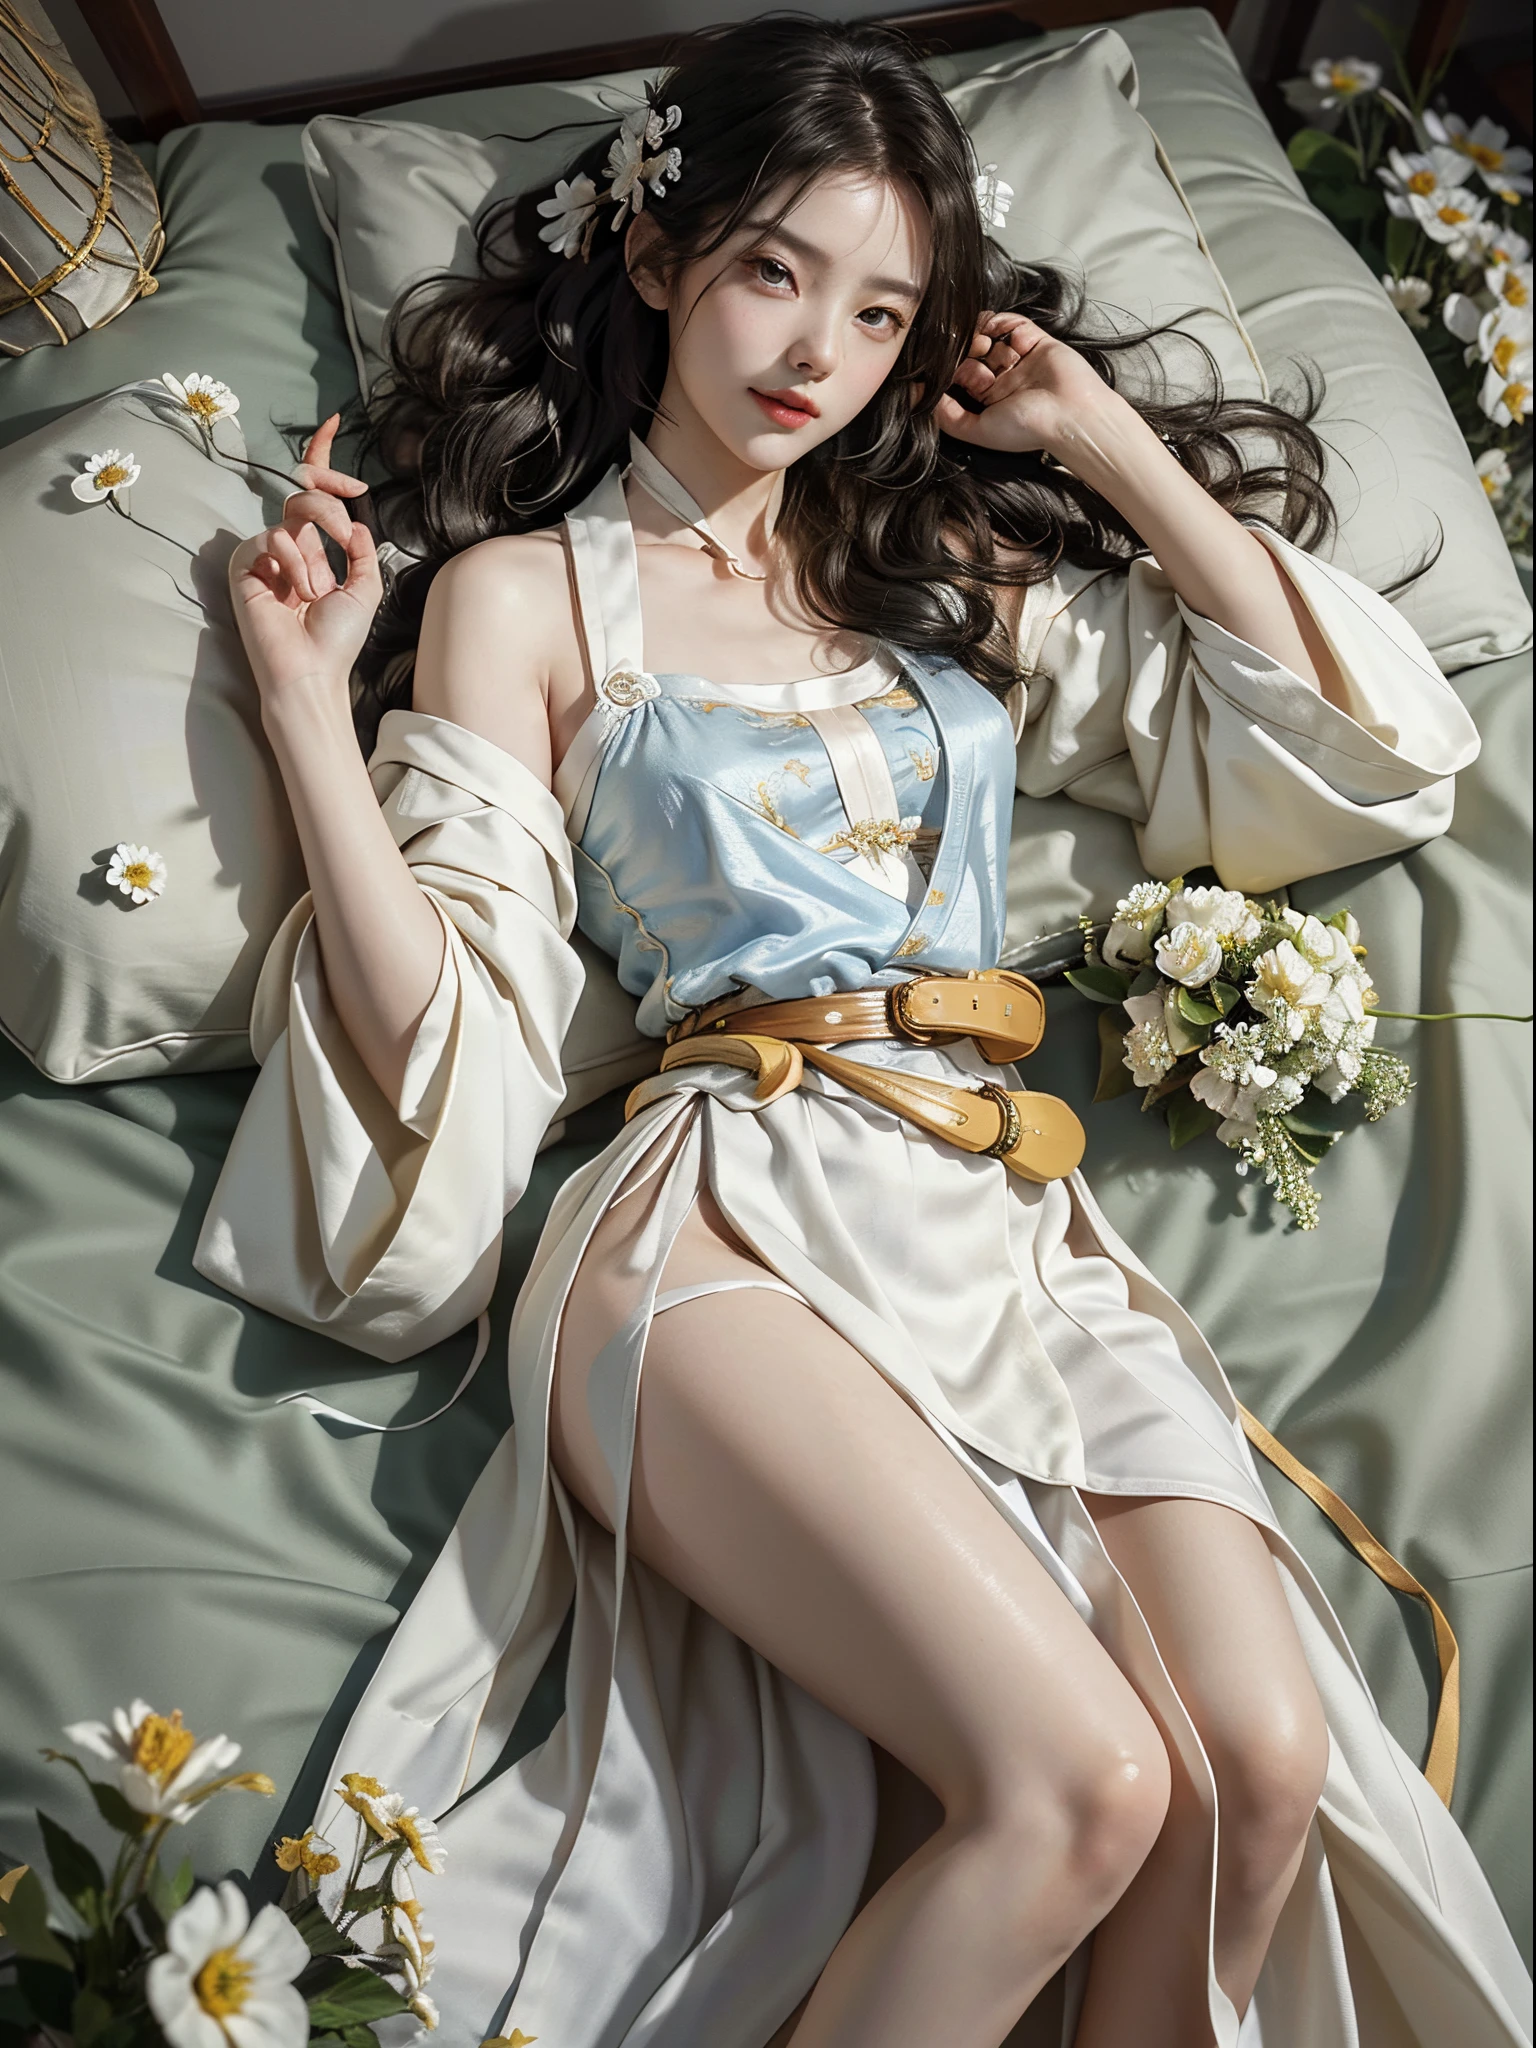 ((knee shot)), Satellite view, Bird's eye view, RAW photogr，18 year old sexy model, Cute young girl, messy  hair，Smiled shyly, curlies, golden hair, (Hanfu), ((White flower hanfu, draped in silk, DEEP-V COLLAR, high-waist, nice belt)), (white colors, Light yellow), Lie down, Lie flat on the bed, Lift the skirt, slender leg, posing elegantly, posed for photo, Surprising detail，The is very detailed, Smooth skin, a warm color palette, best qualtiy, The is very detailed, the detail, (current:1.7),((Best quality at best)),absurd res,(Ultra-high resolution),(realisticlying:1.6),realisticlying,octaneratingrendering,(Hyper-realistic:1.2), (photorealiscic face:1.2), (8k), (4K), (tmasterpiece),(realistic skin textures)